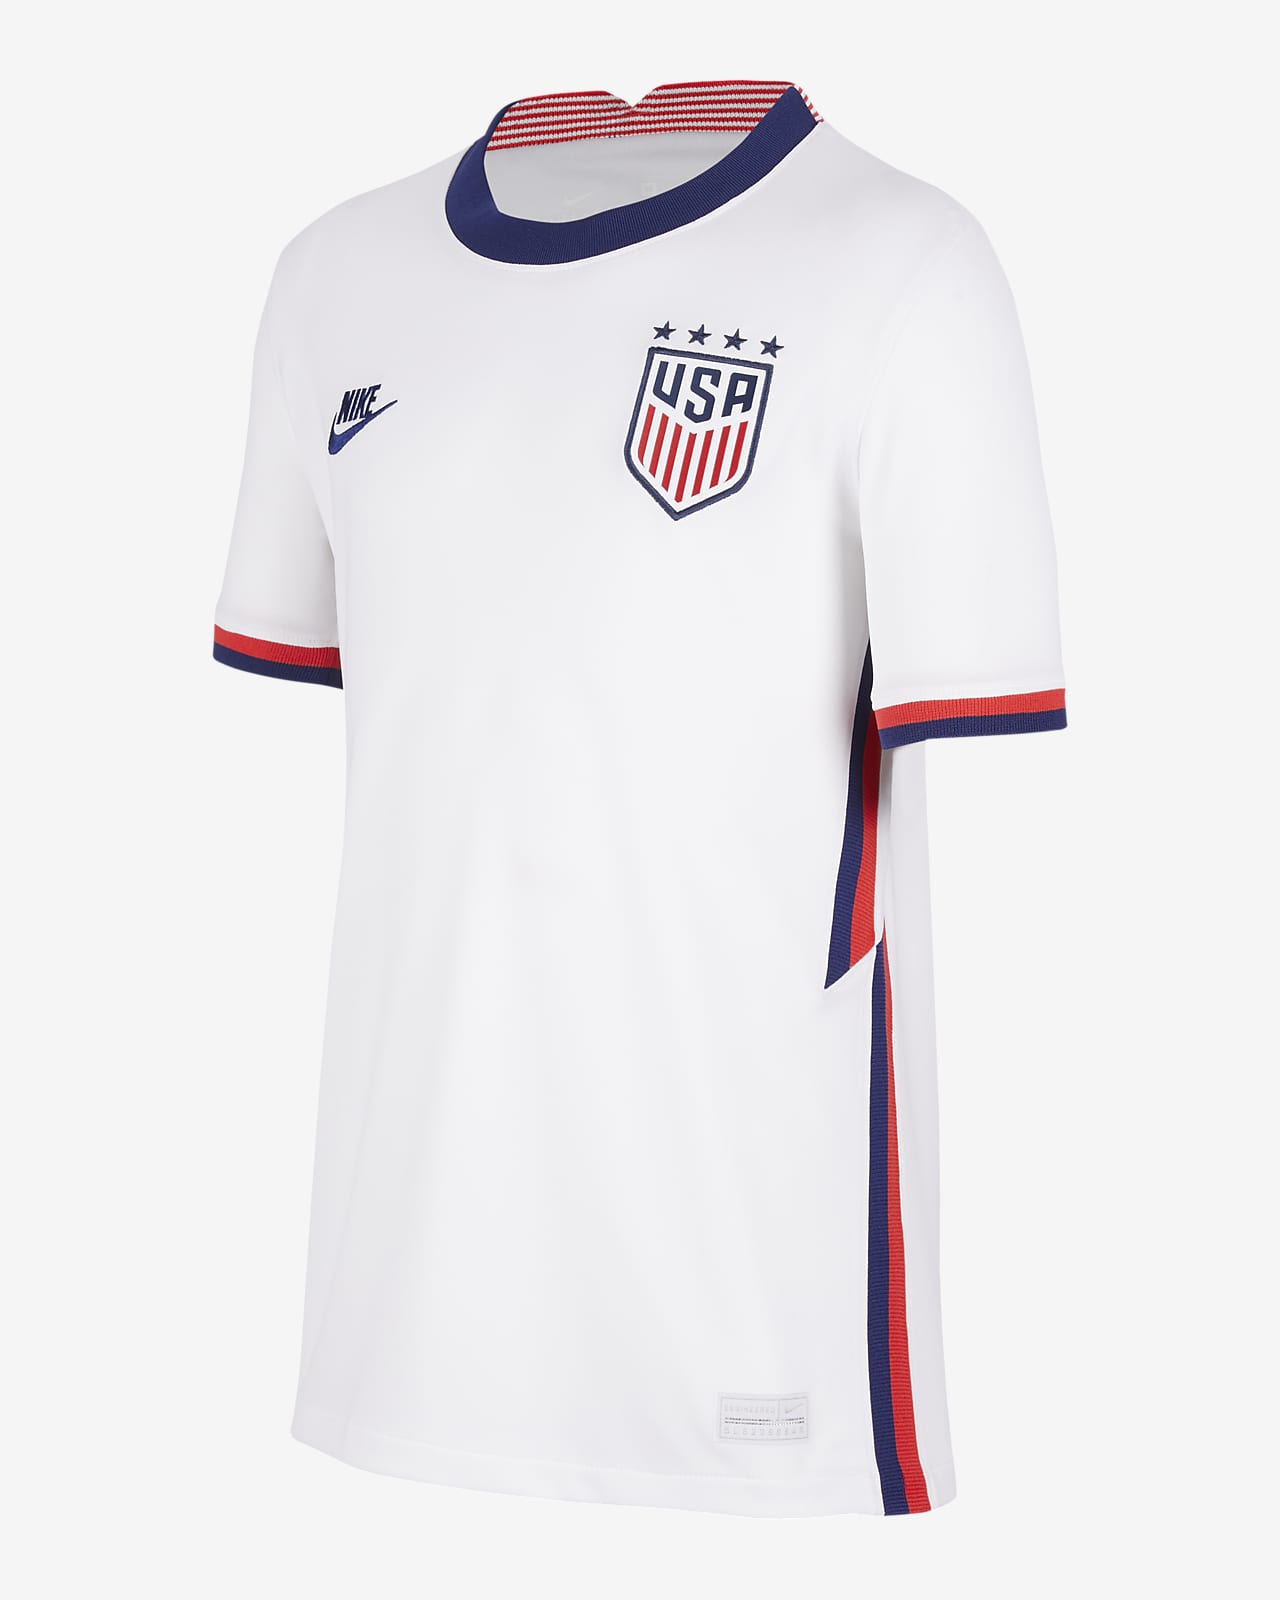 us youth soccer jersey